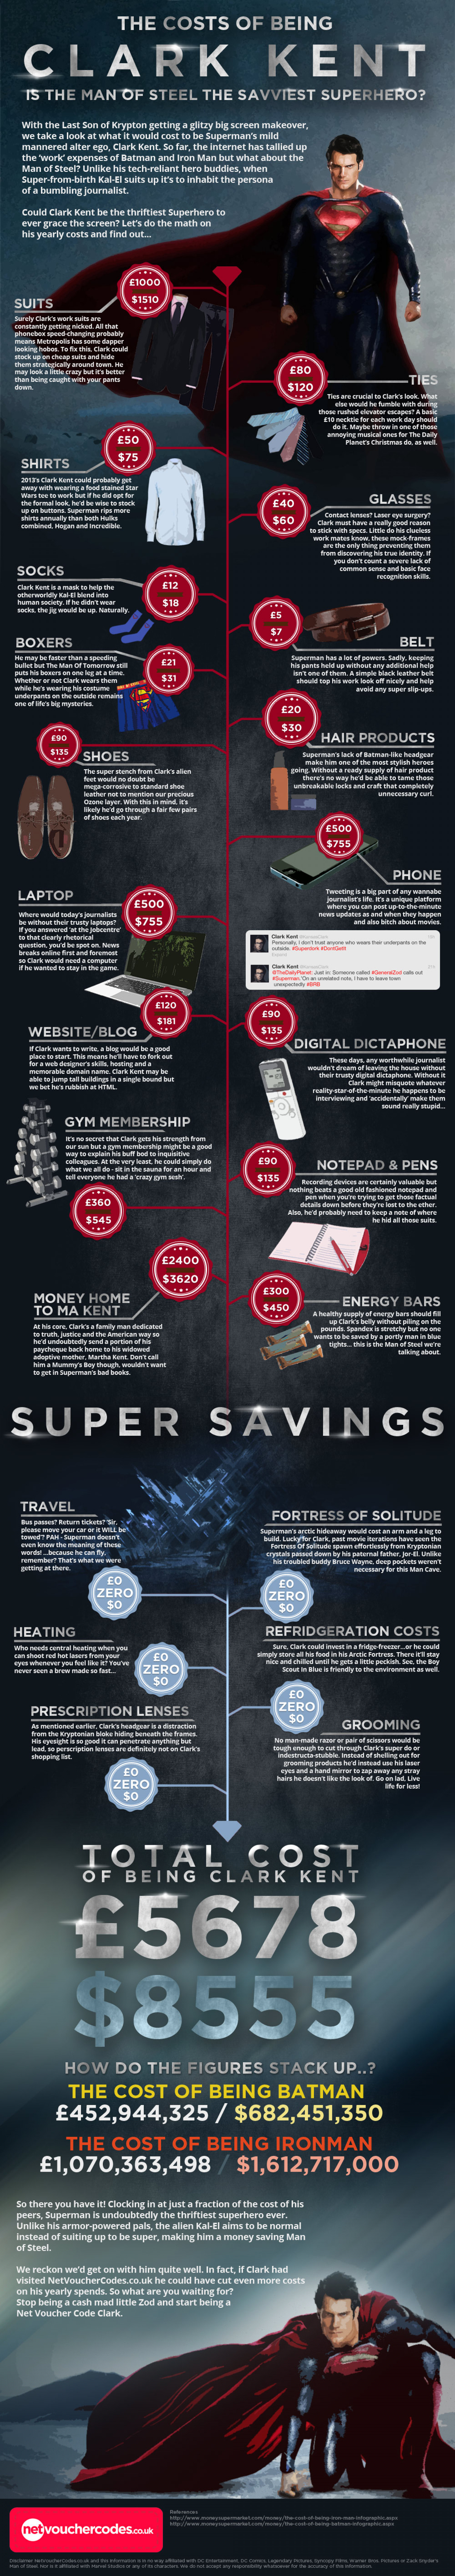 The Costs of Being Clark Kent Infographic